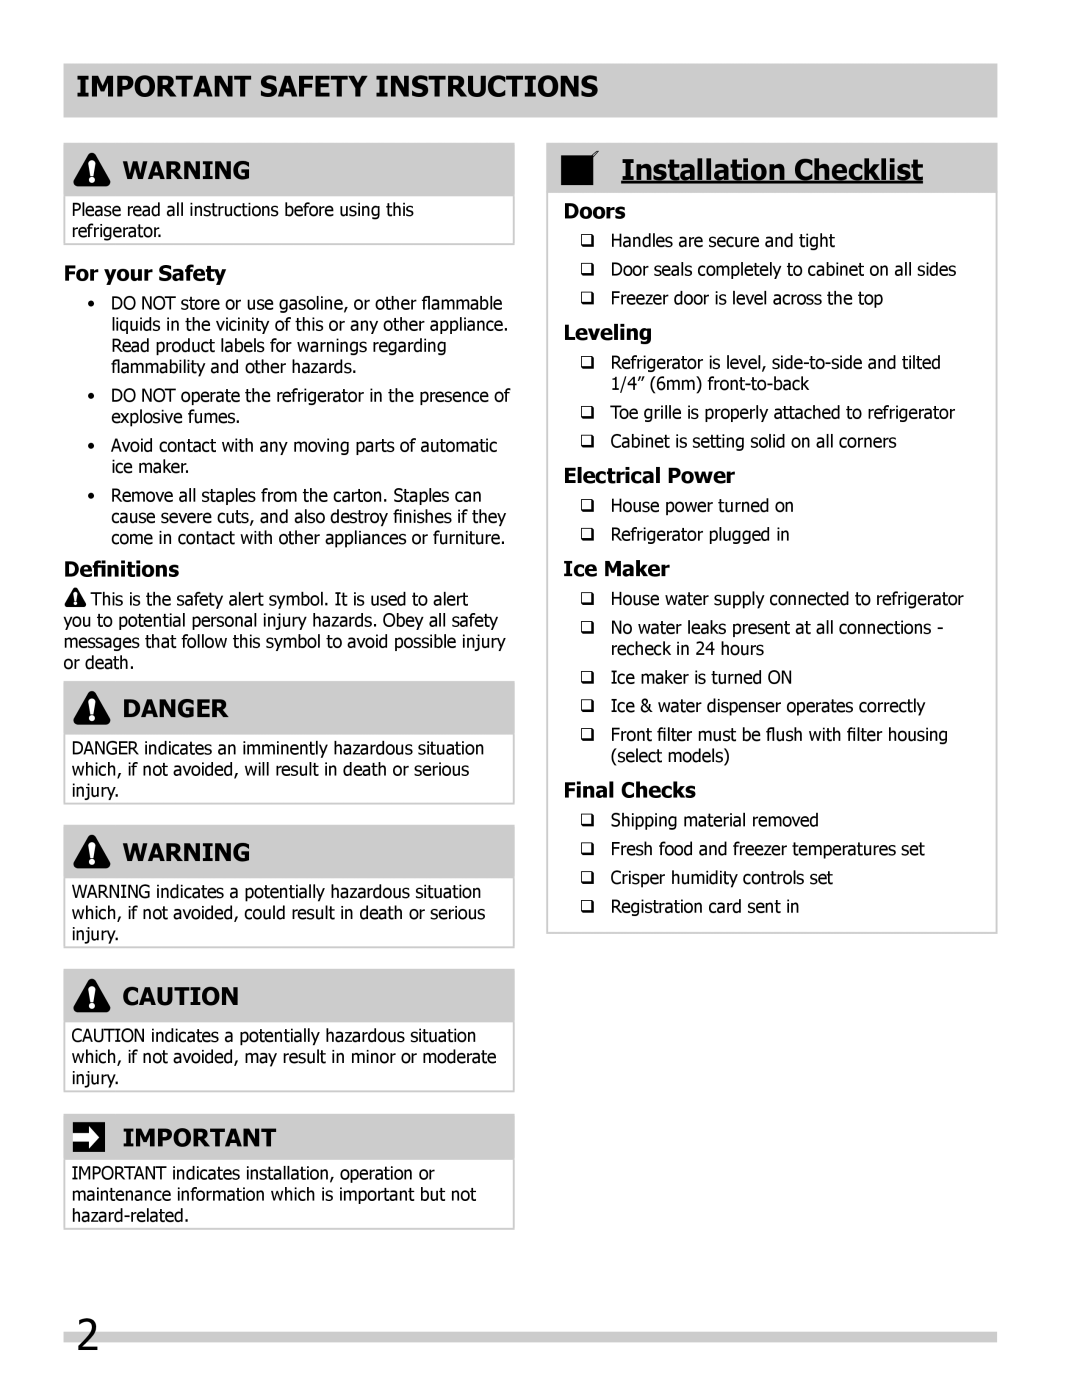 Frigidaire FGHS2332LP Important Safety Instructions, Installation Checklist, Danger, For your Safety, Definitions, Doors 